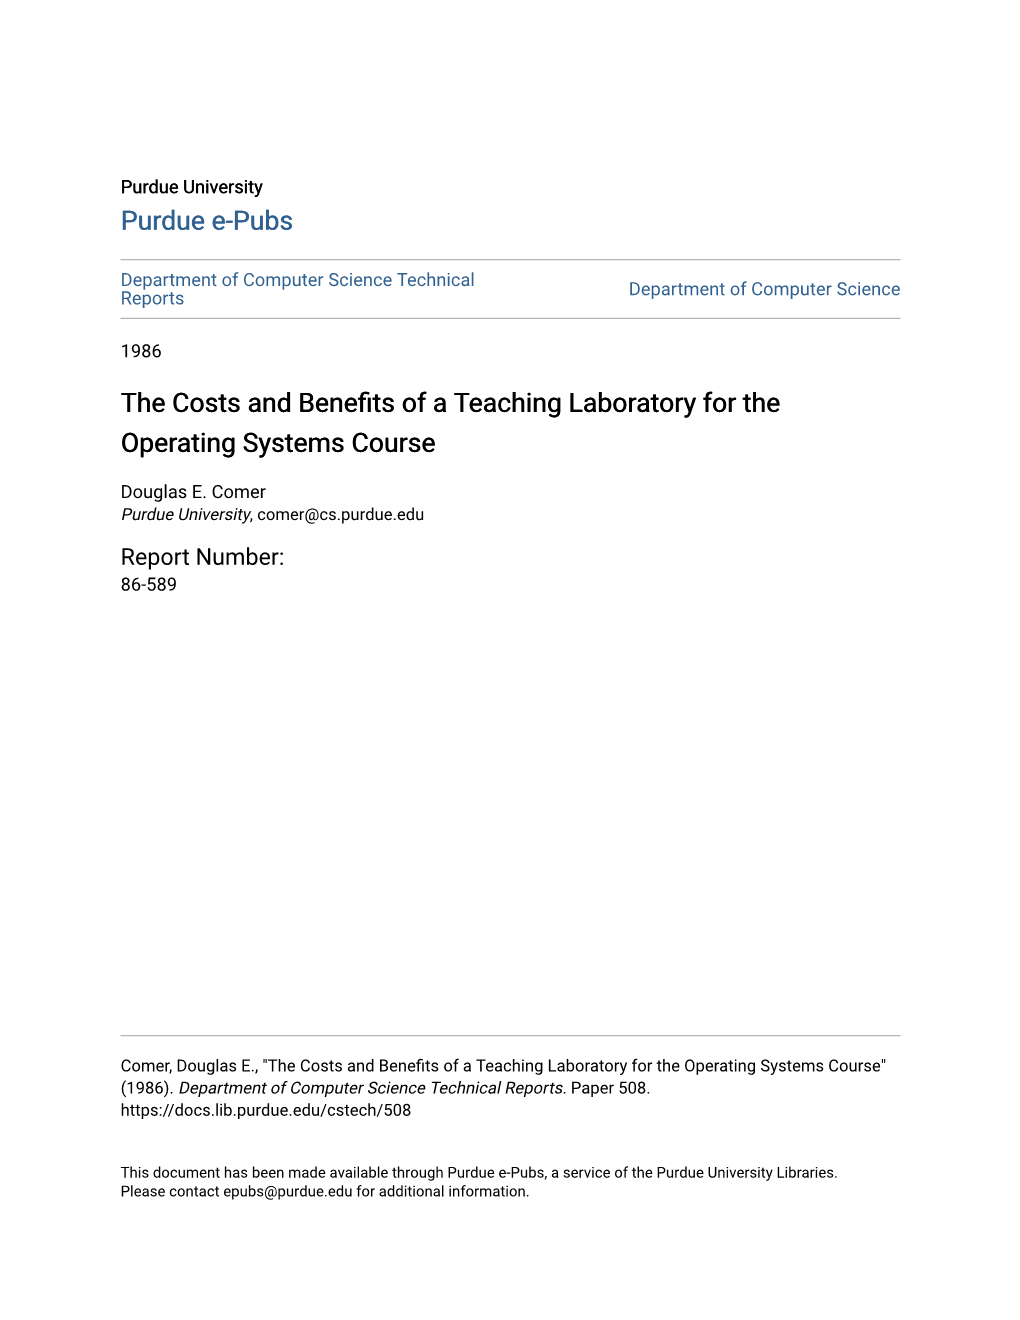 The Costs and Benefits of a Teaching